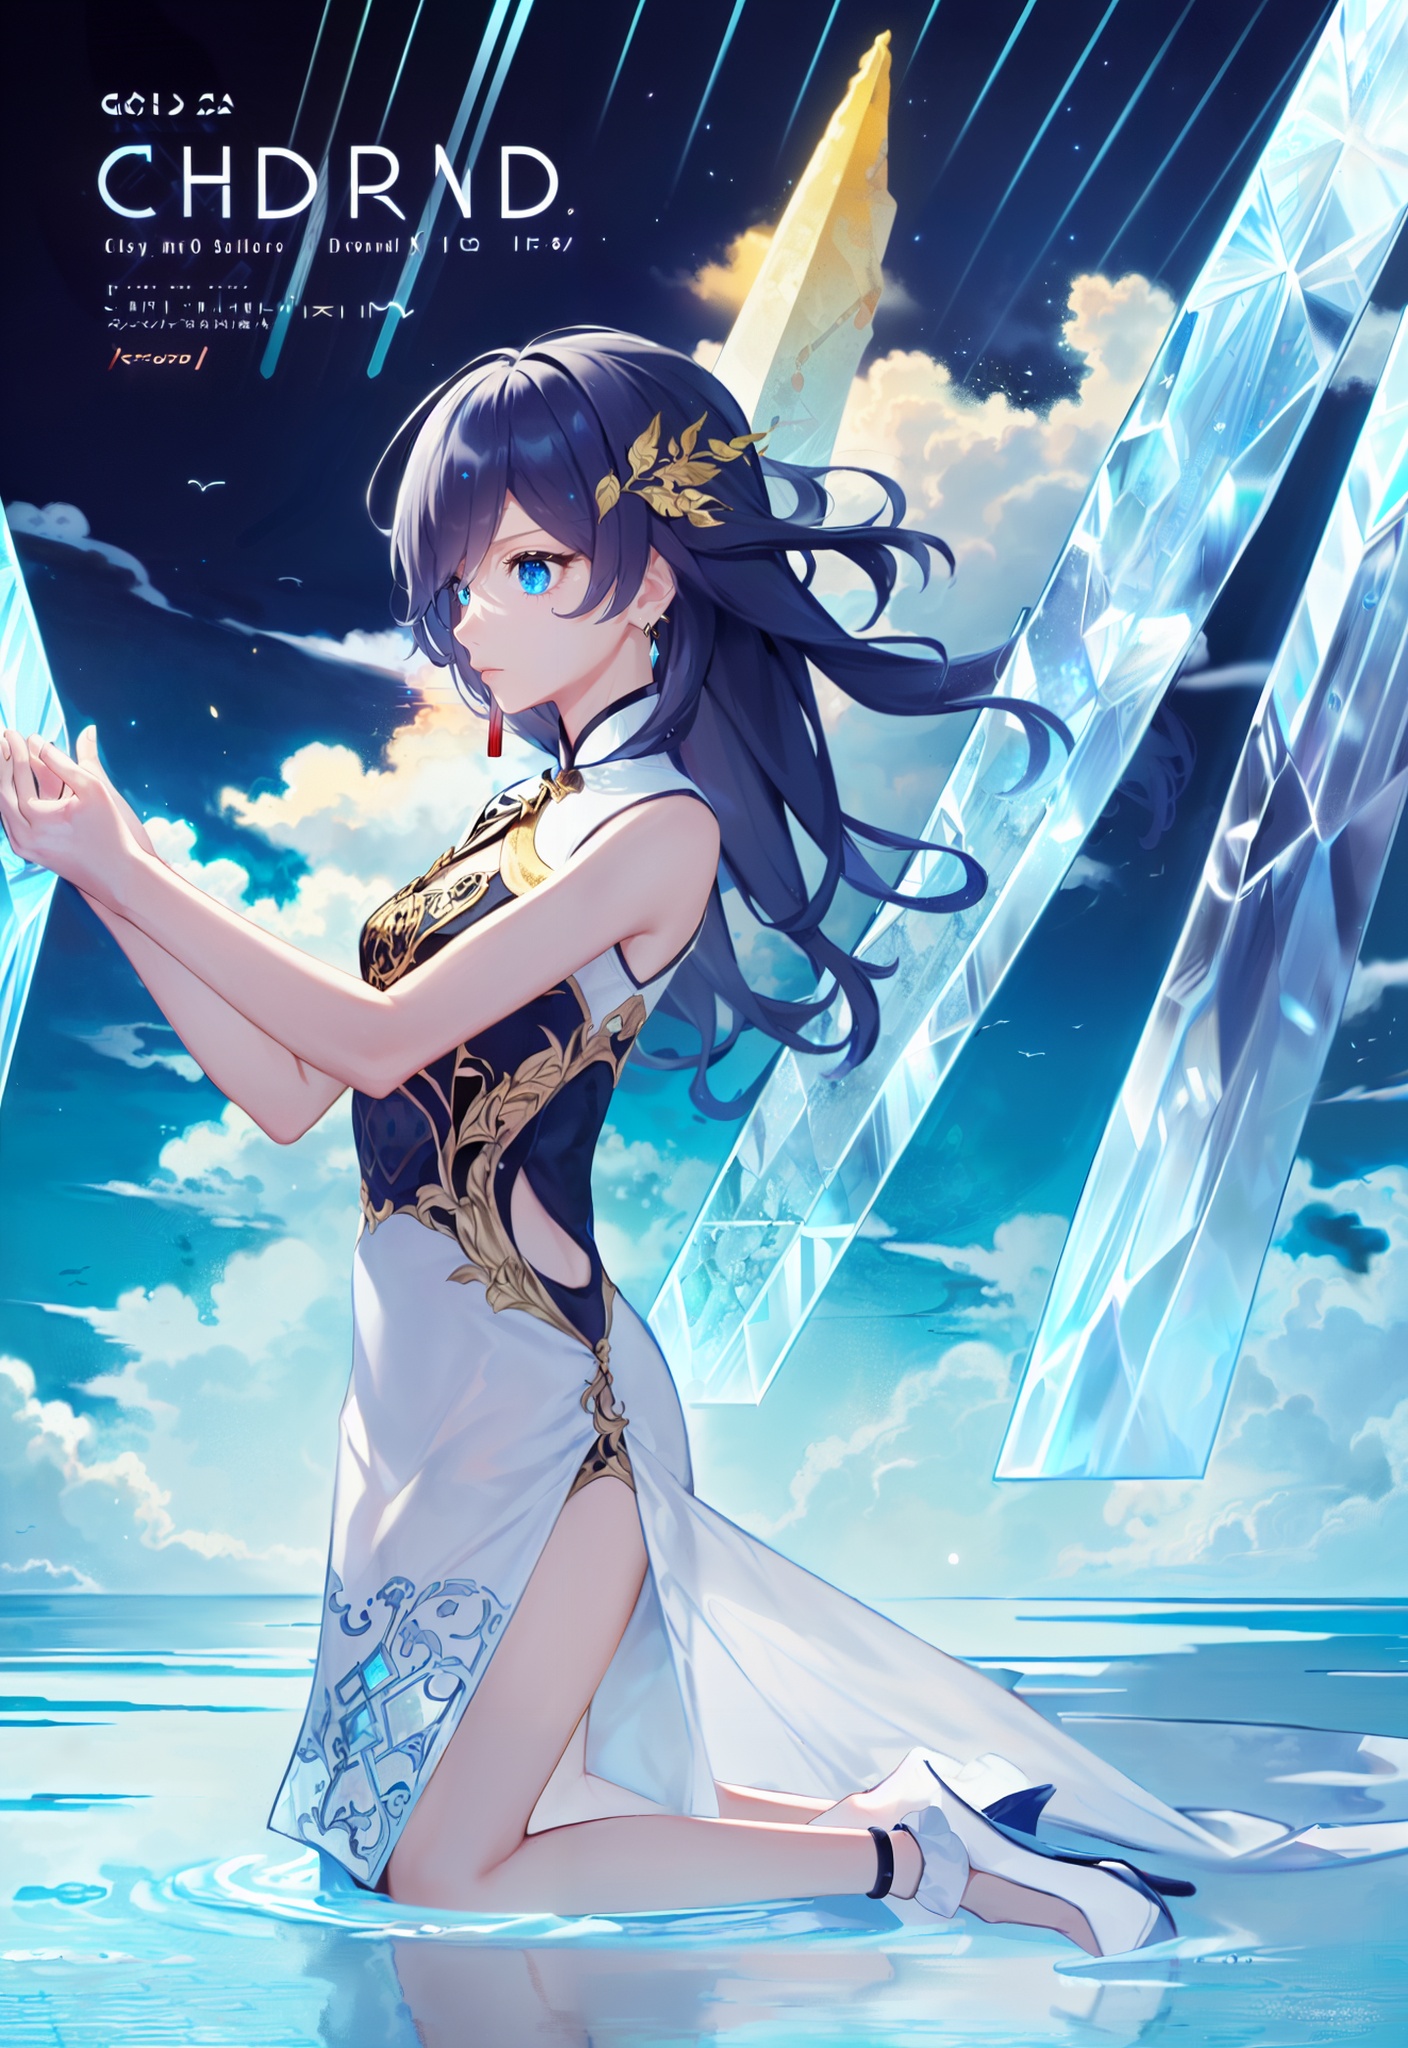 simple_white_background,golden and white theme,Sense of coordination,sense of order,mathematics beauty,(cover design),(cover art),((trim)),album_art,official art,(Master's work),full body,( closeup, 1girl,solo:1.2),<lora:qingyan-v100-000022:0.8:lbw=OUTALL>,qingyan,1girl,fu hua,chinese clothes,blue eyes,short china dress,lhair ornament,black hair,bangs,bare hands,sleeveless,blue eyes,cloud,sky,leaf,Cloud patterns,Chinese pattern,white geometry,colorful geometry,reflection,crystal_art,pattern_design,creative,Mystery pattern,colorful crystal decorate,blue crystal,(architectural art),((geometric art)),pattern design,creative,shine,dream,fly in sky,swim in cloud,------,Low saturation,grand masterpiece,Perfect composition,film light,light art,